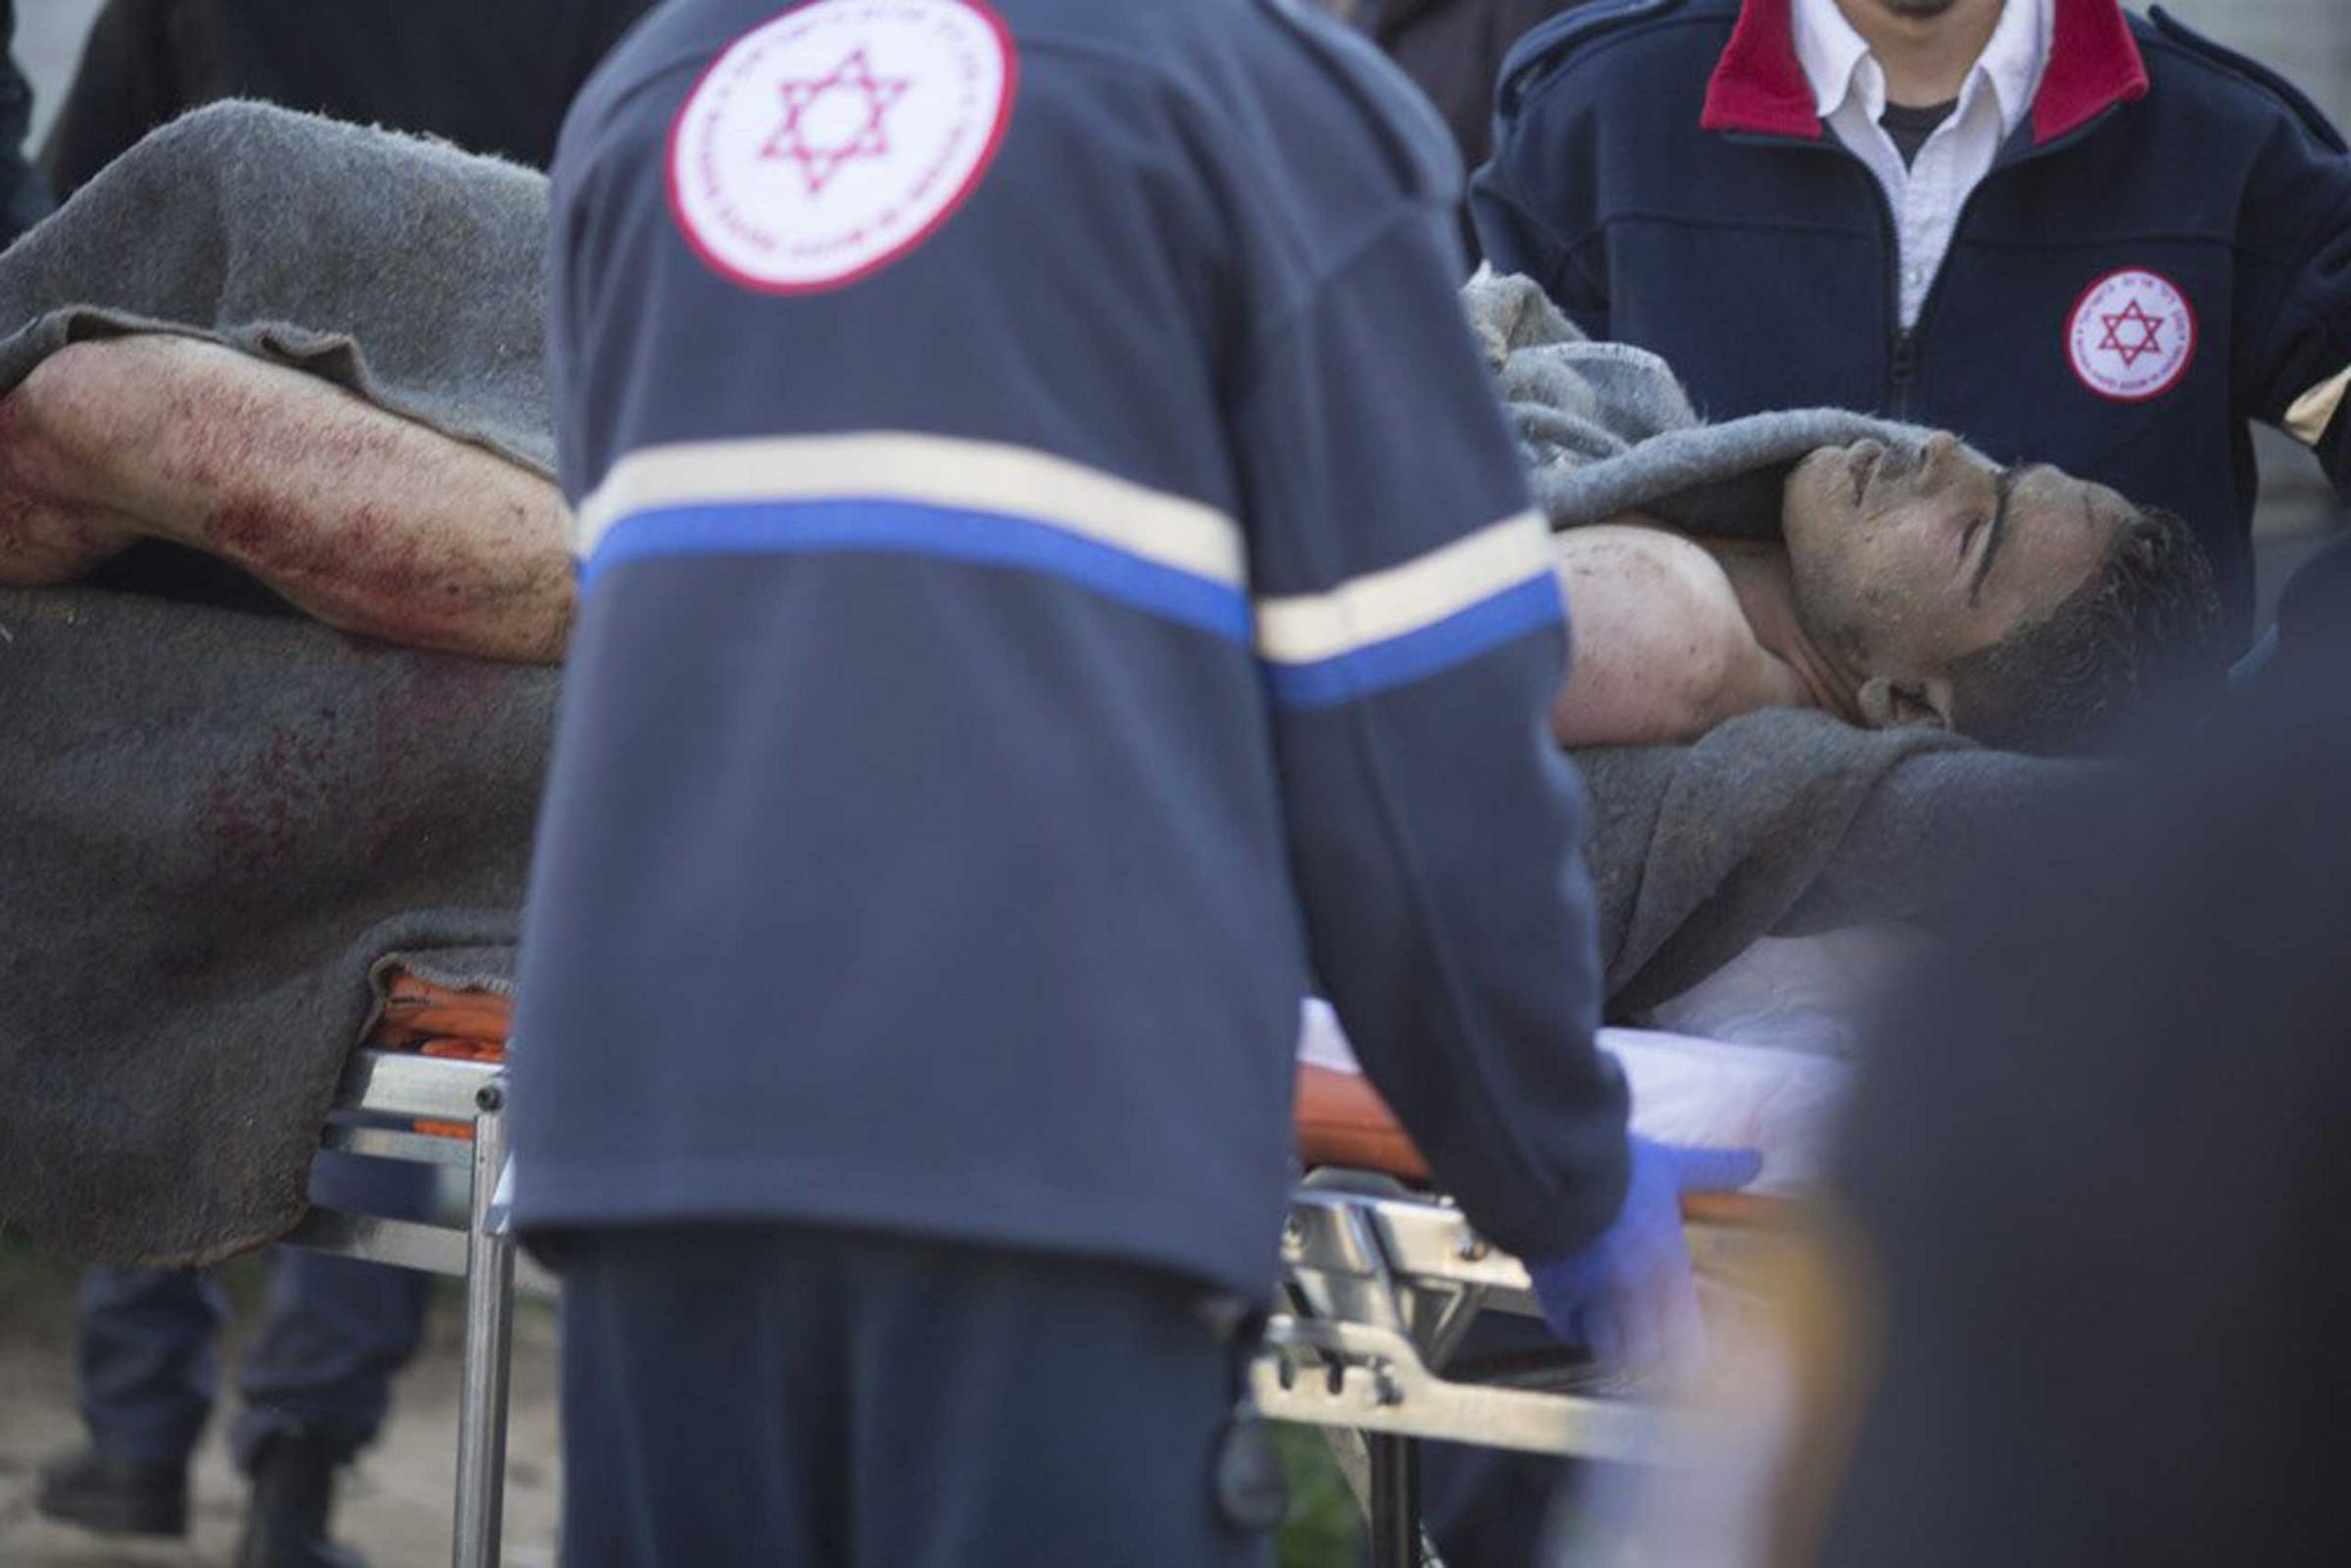 Israeli police carry the injured suspect on a stretcher as they attend the scene of a stabbing attack on Jan. 21, 2015 in Tel Aviv.